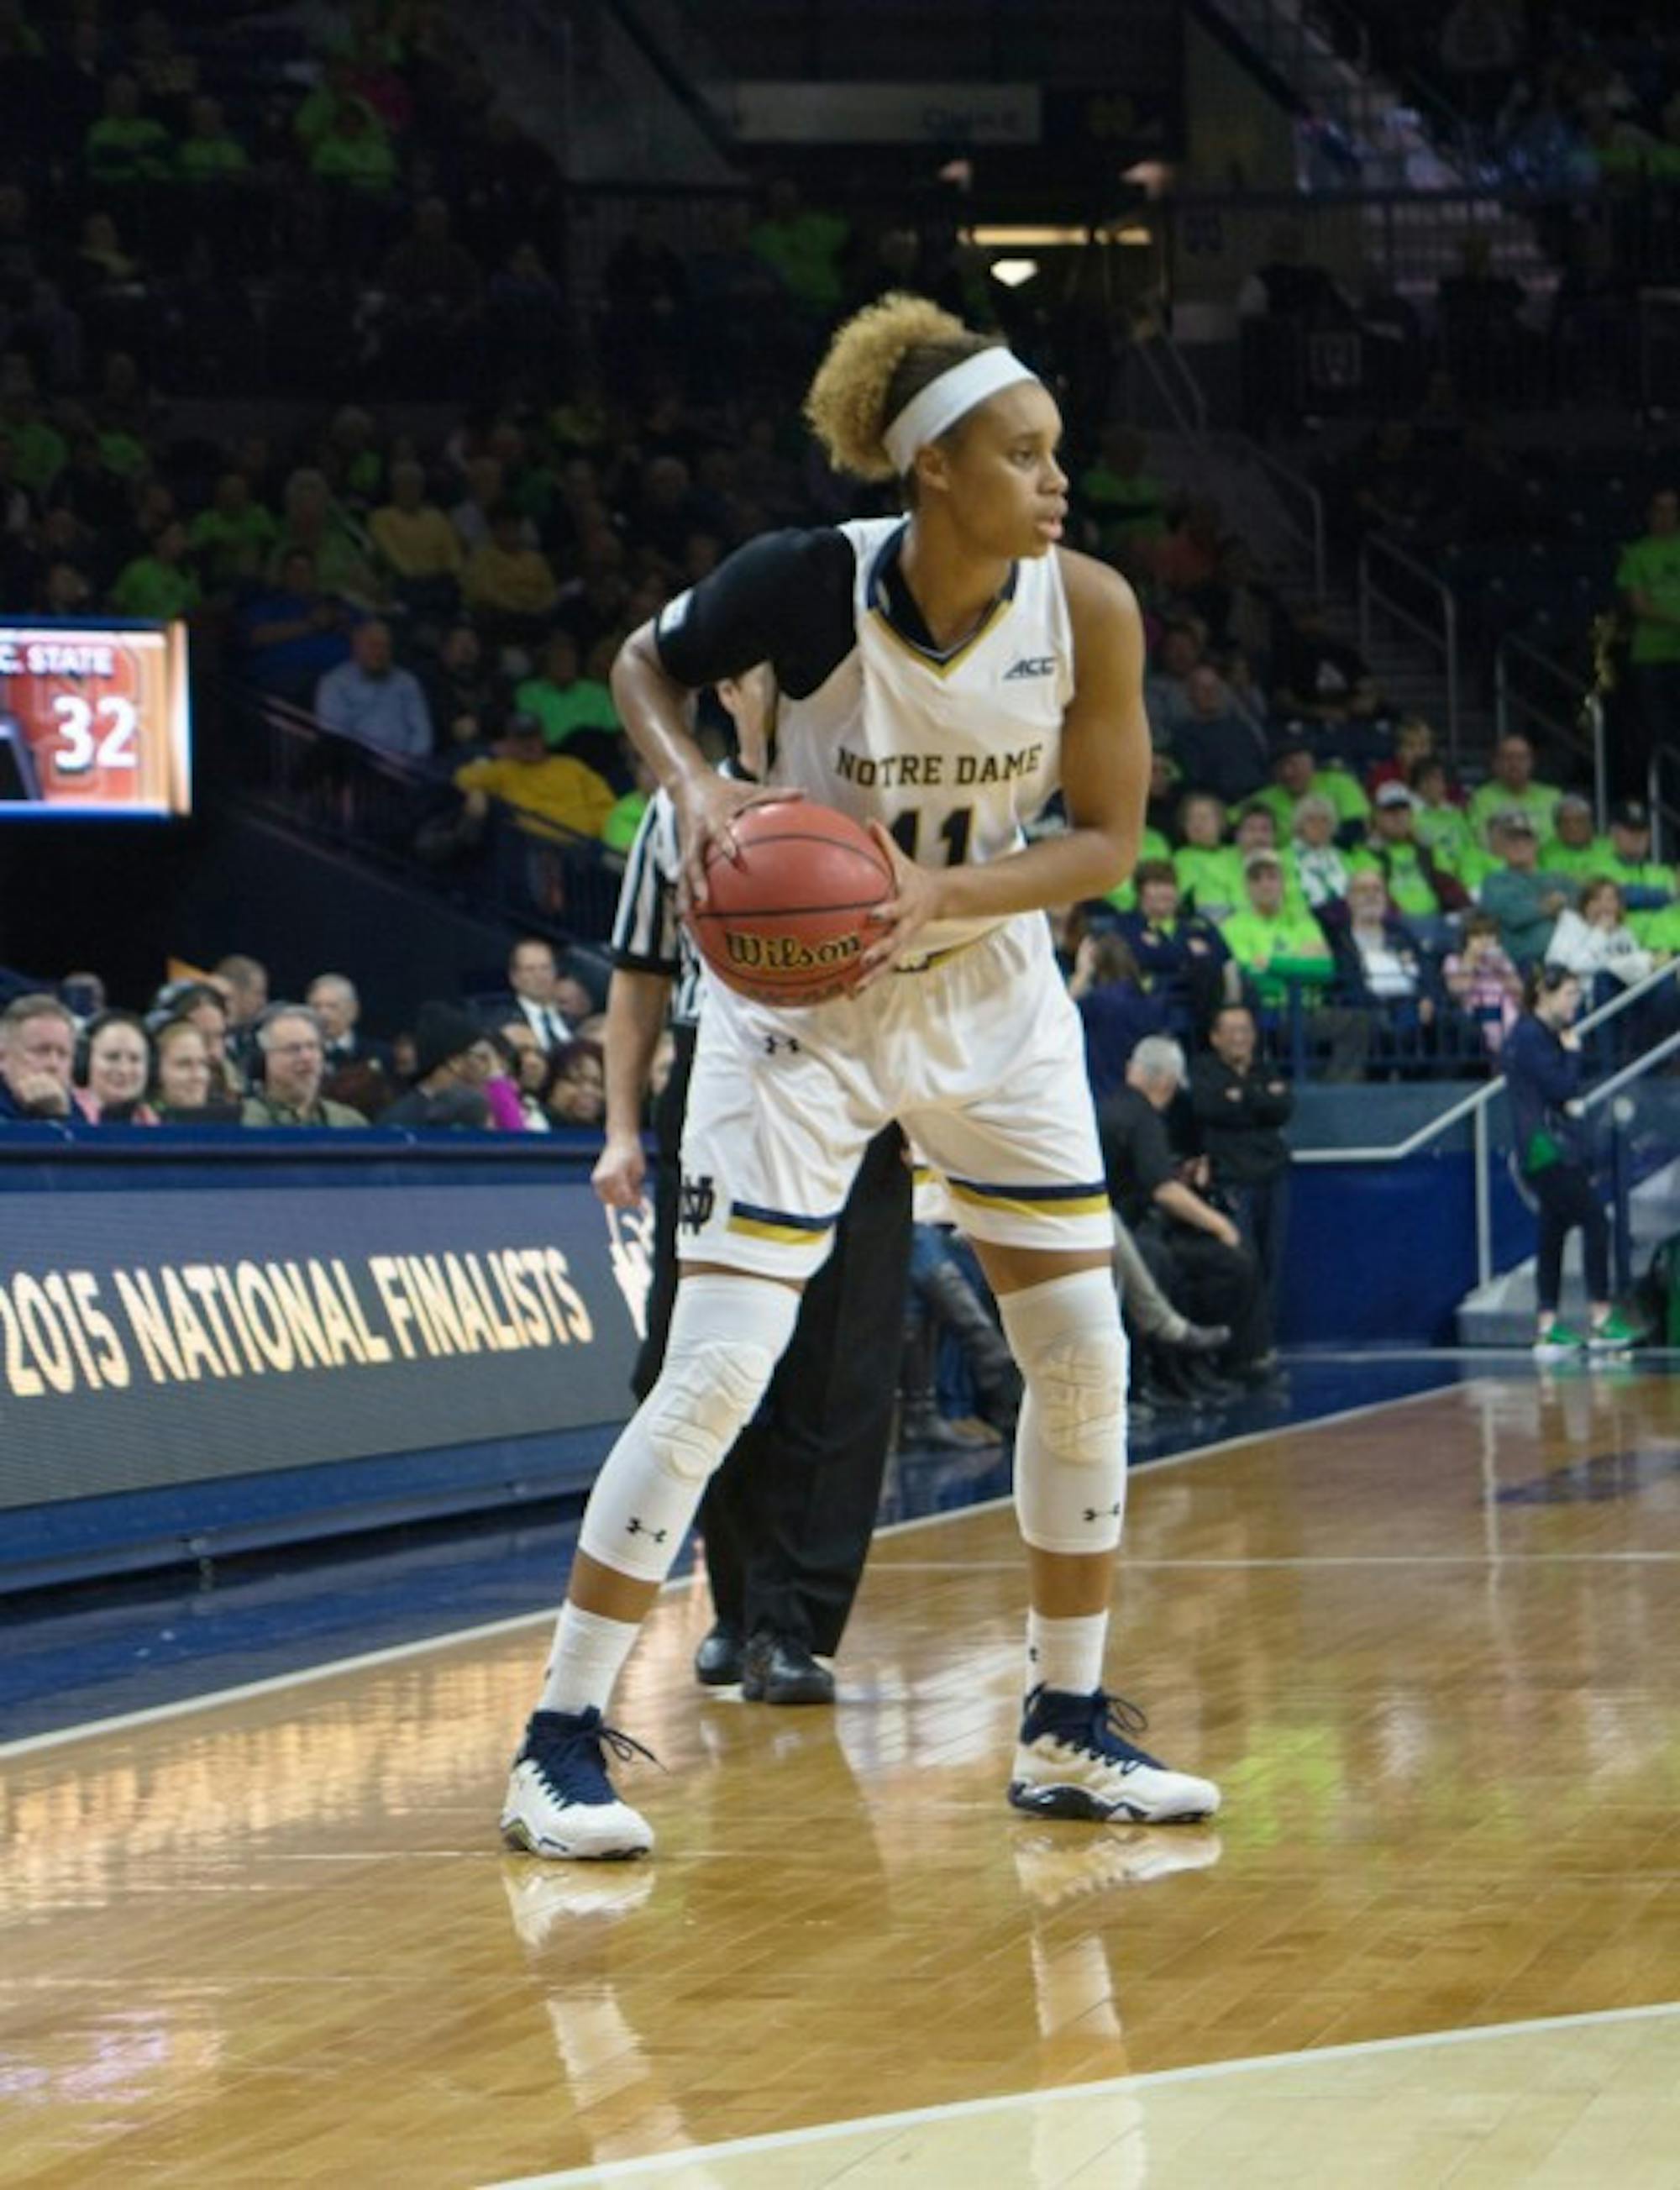 Irish sophomore forward Brianna Turner surveys the court during Notre Dame’s 82-46 win over North Carolina State on Thursday. Turner has anchored the Irish defensively, averaging 3.3 blocks per game.